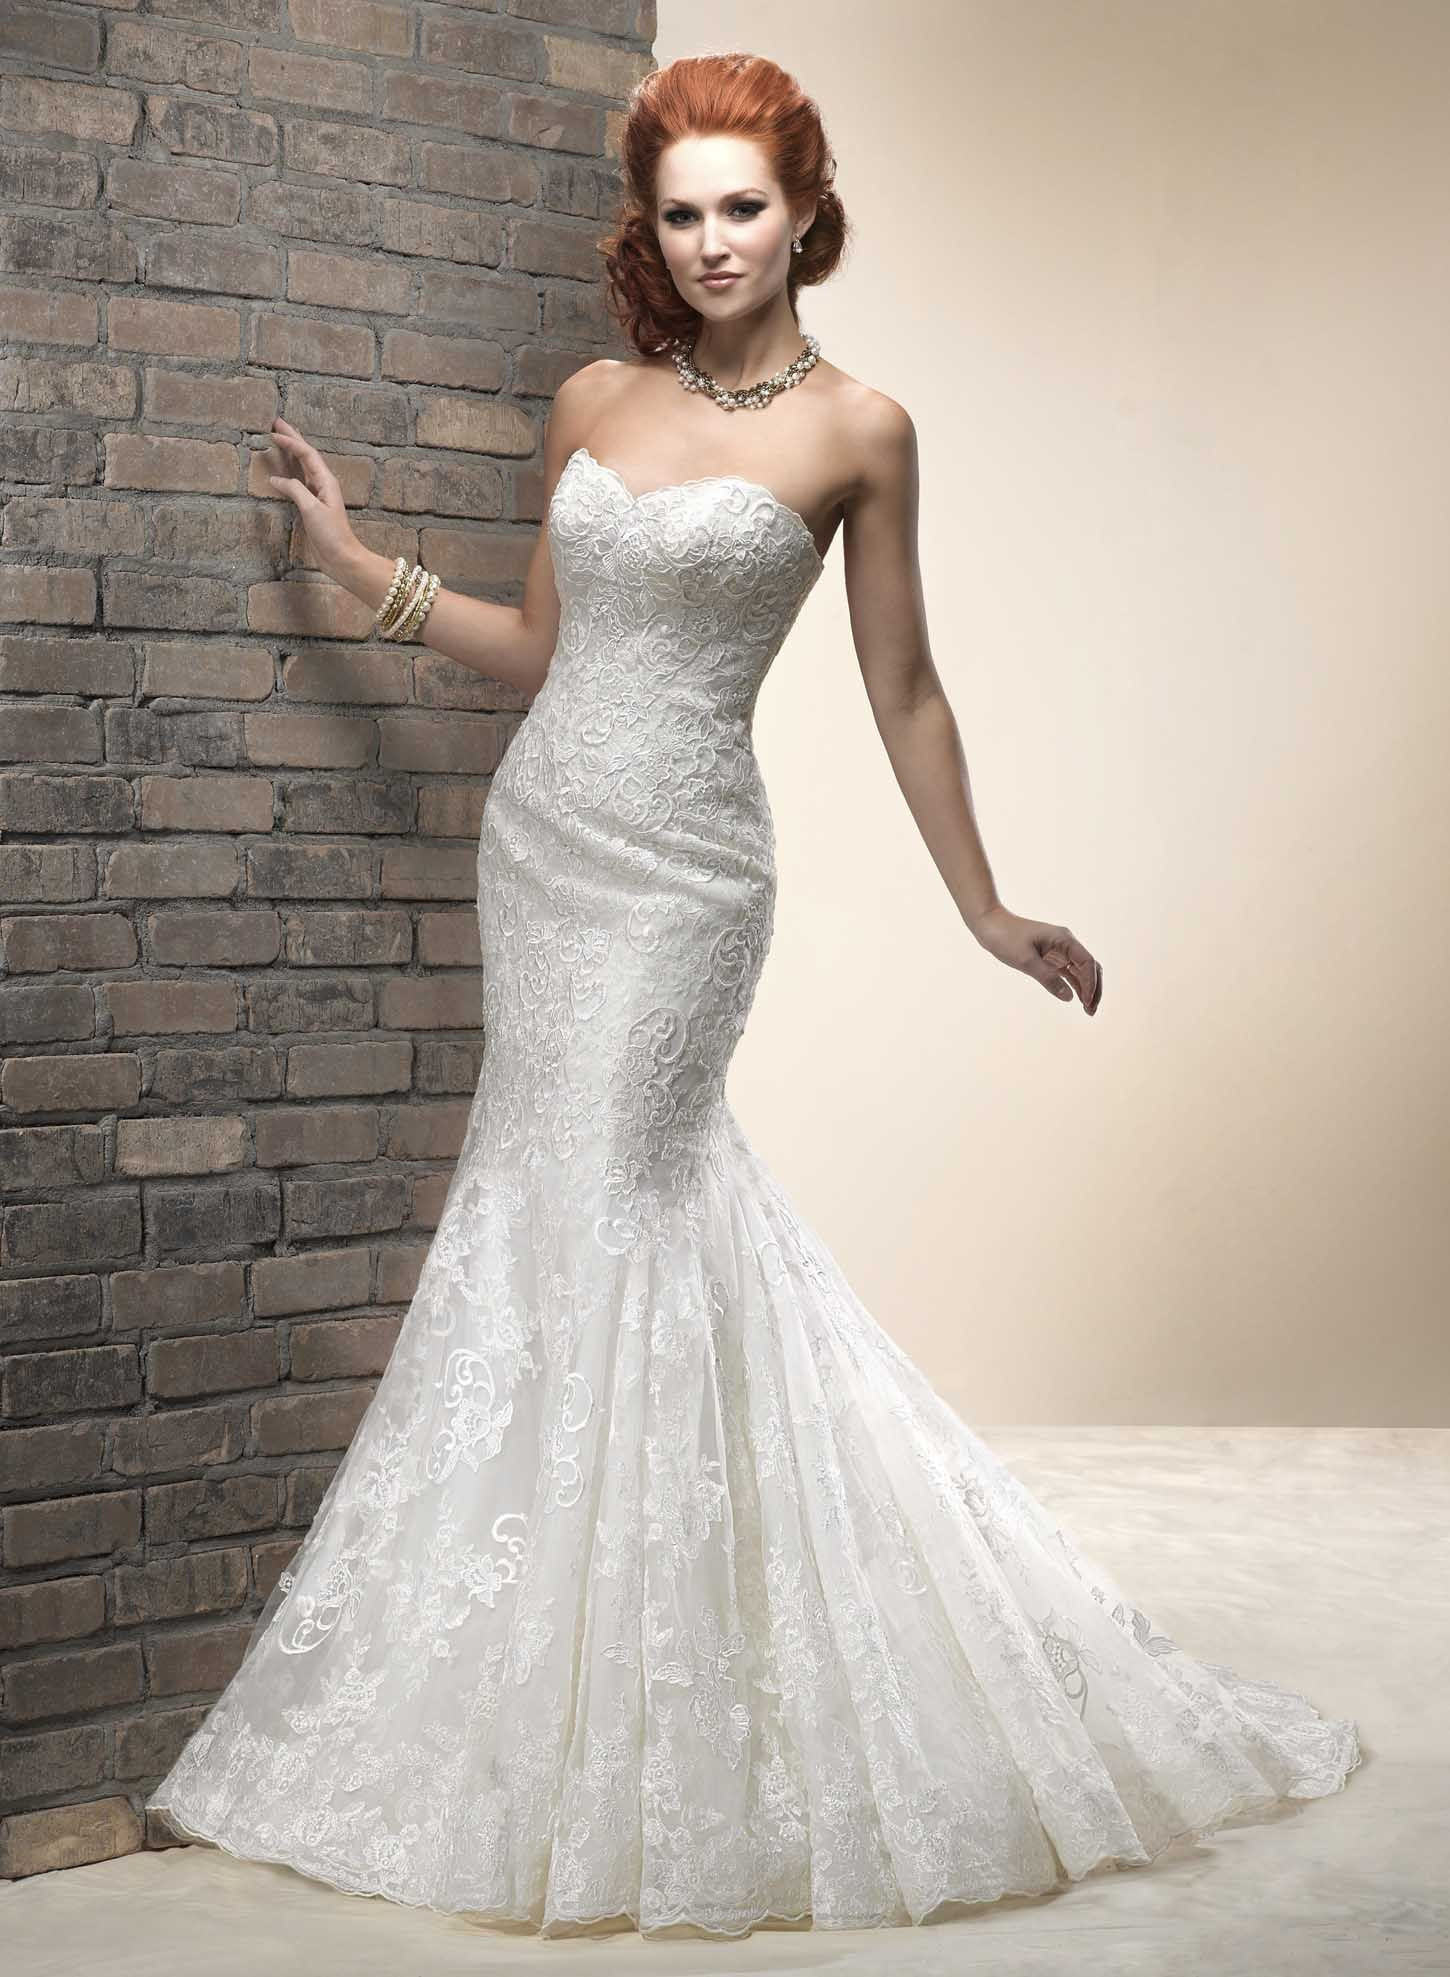 Lace Mermaid Wedding Gown
 Show Your Beauty in Lace Wedding Dresses on Wedding